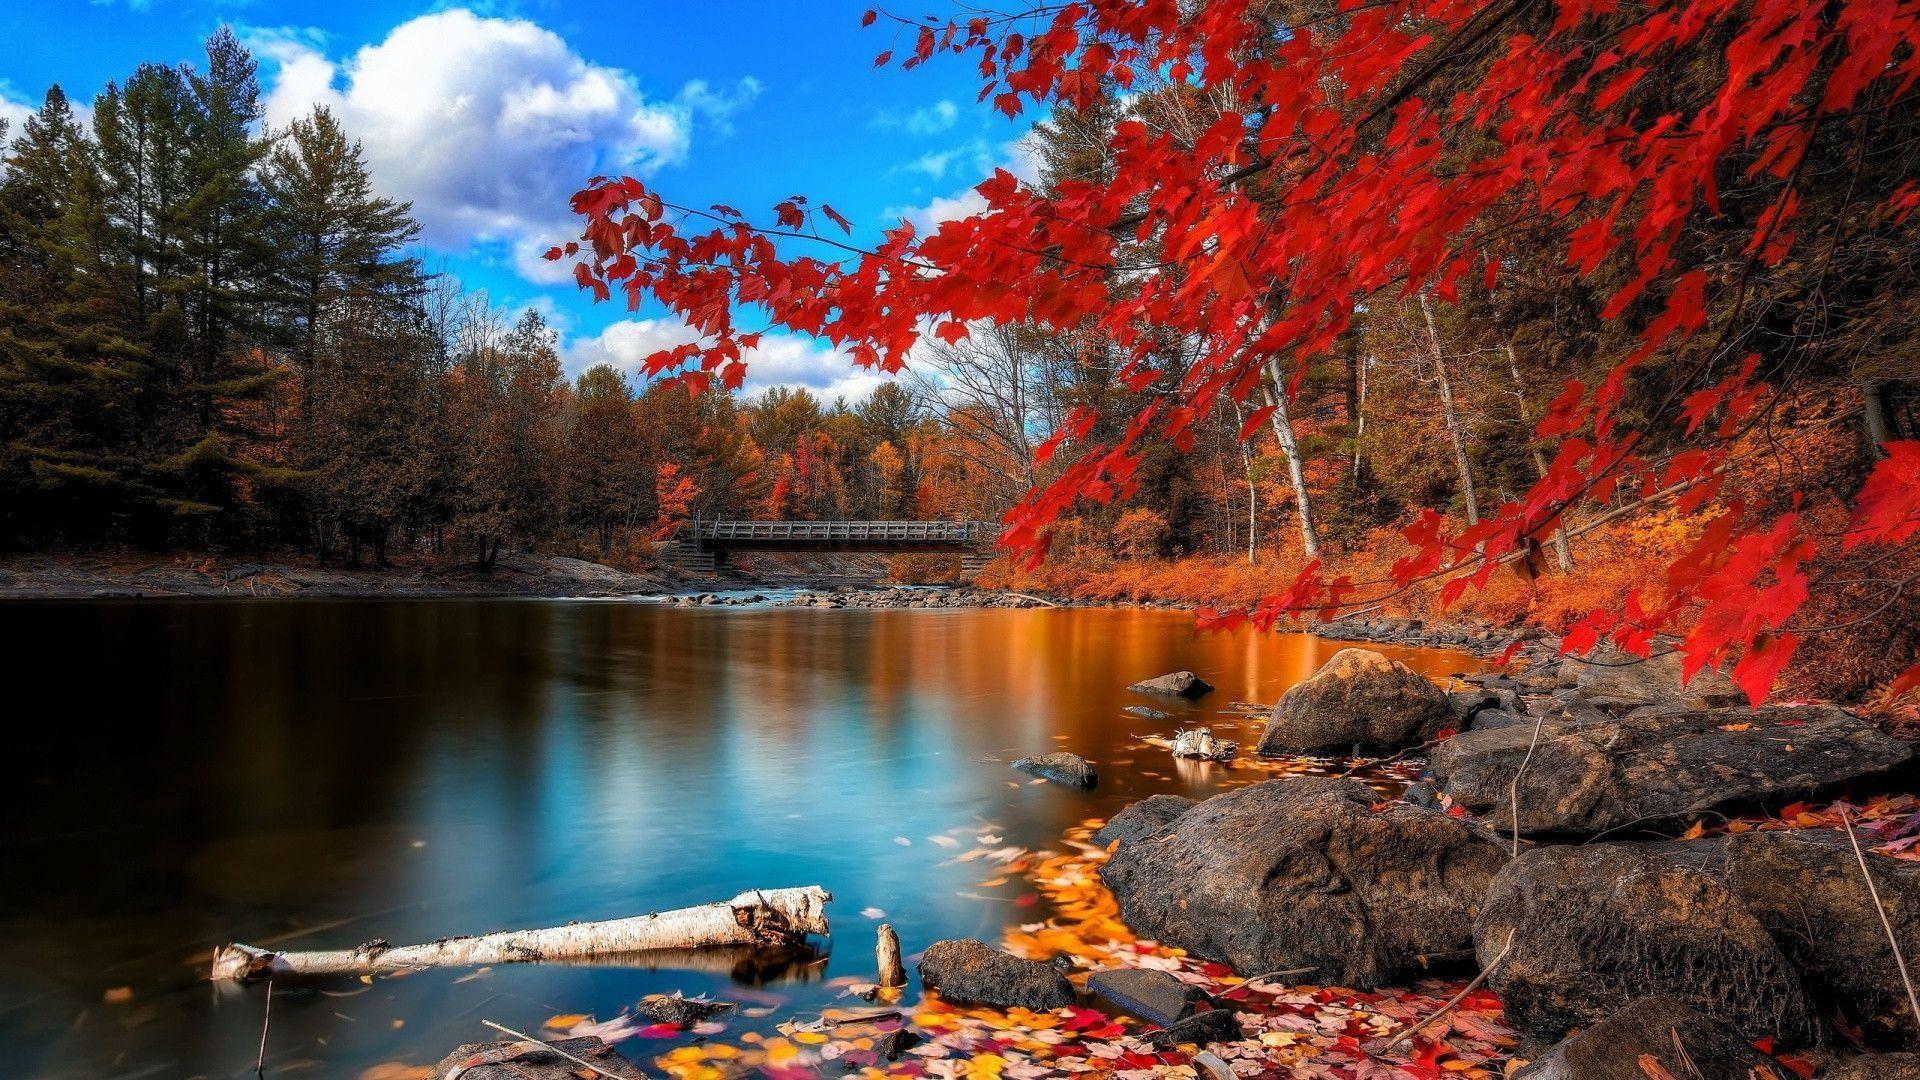 Autumn Forest Scenery Wallpaper